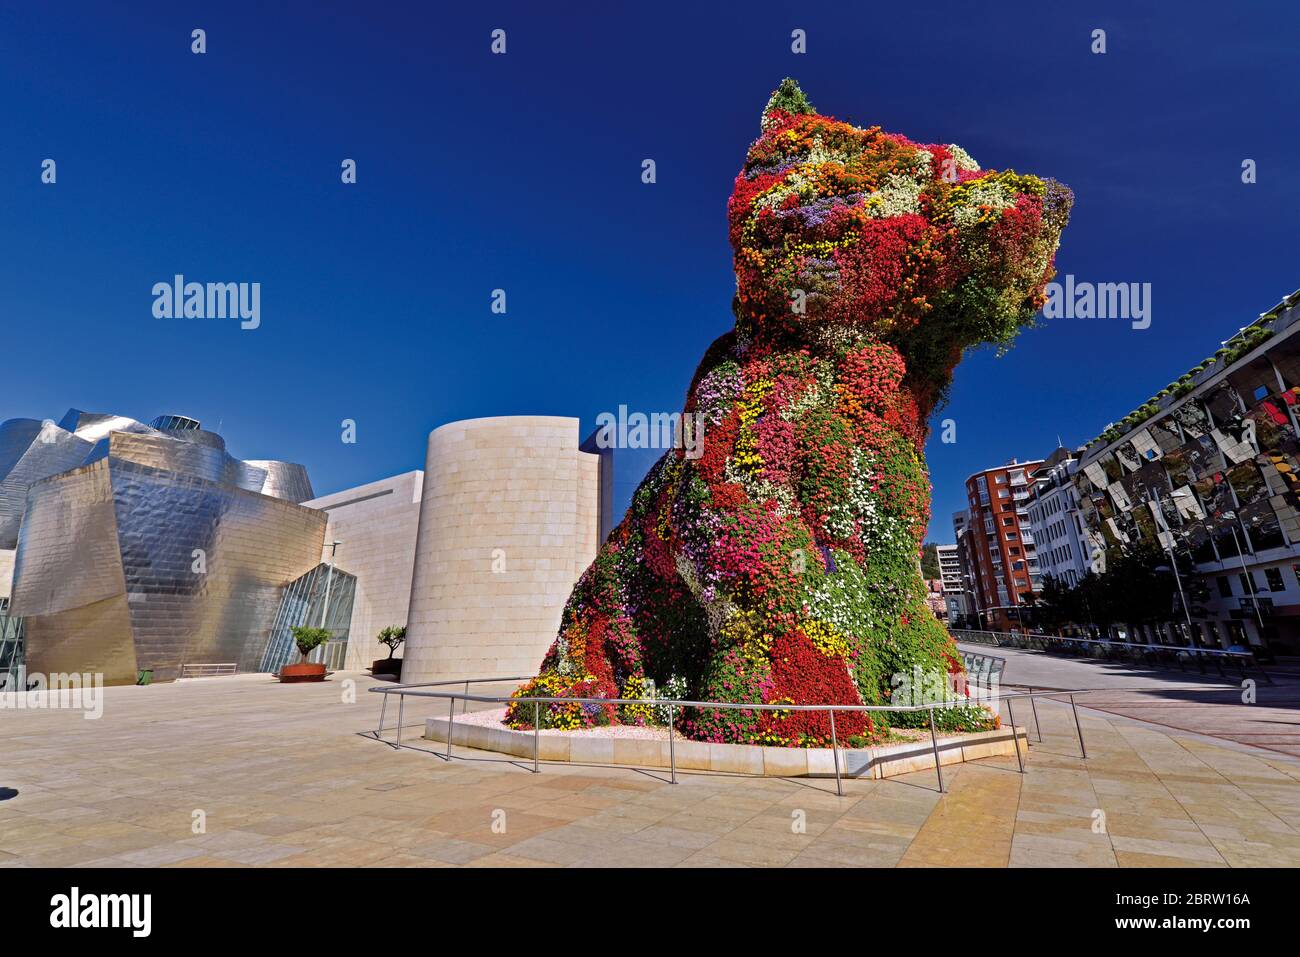 Giant dog made of thousands of colorful flowers Stock Photo